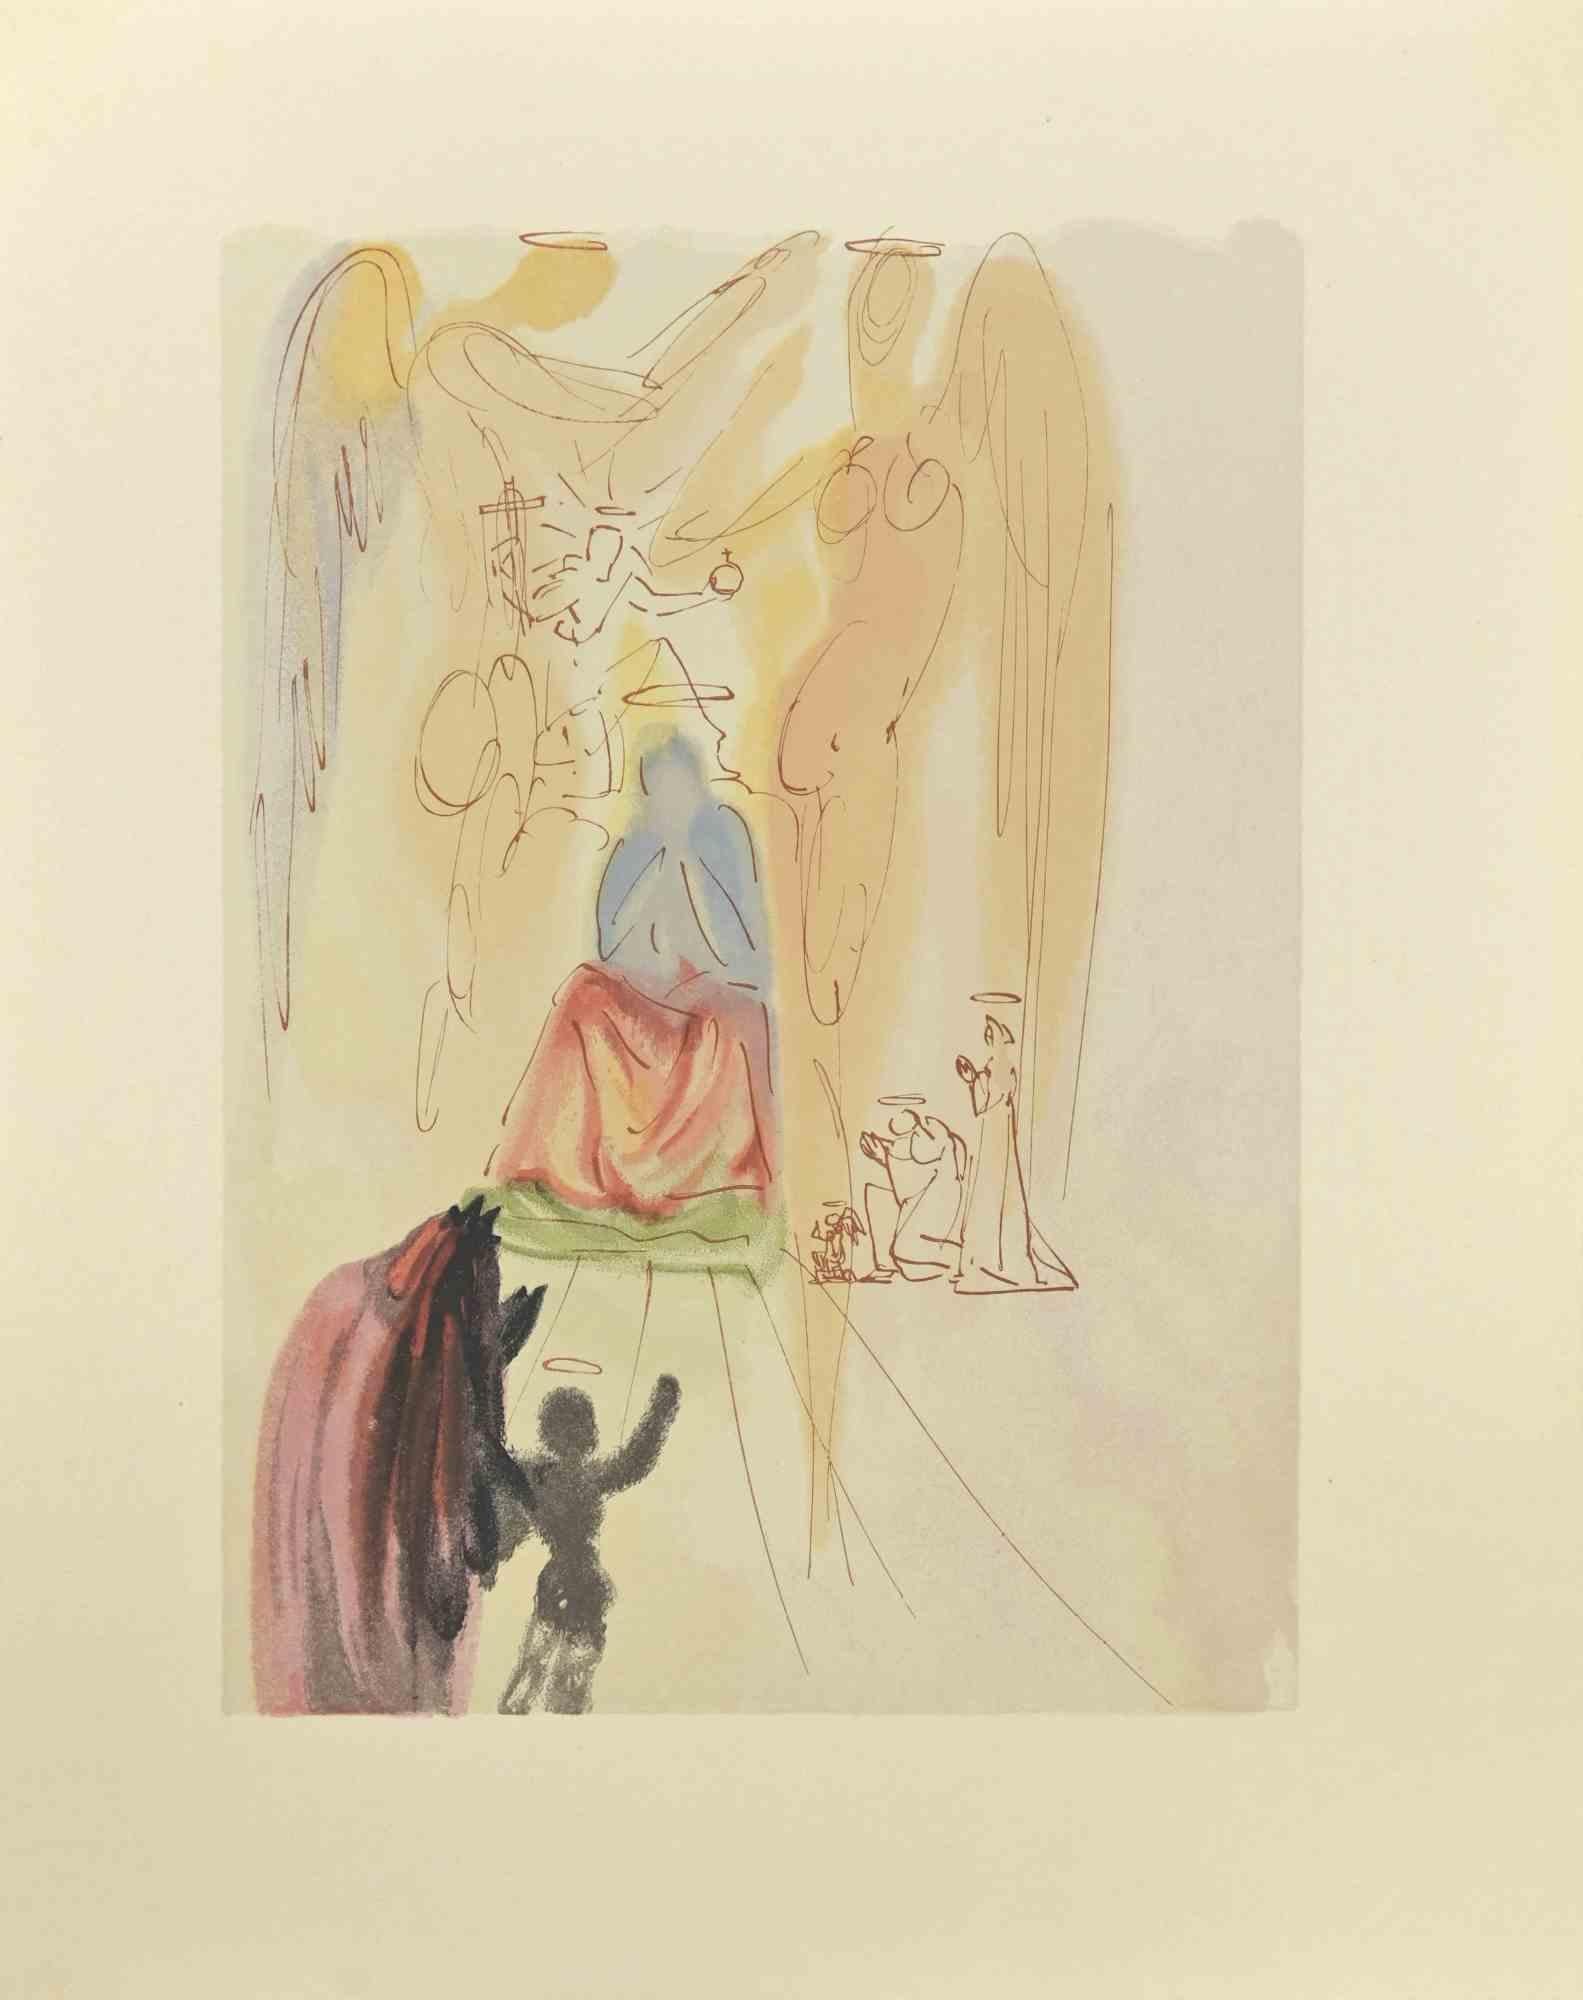 Salvador Dalí Figurative Print - Beatrice and the Triumph of the Saints  - Woodcut  - 1963